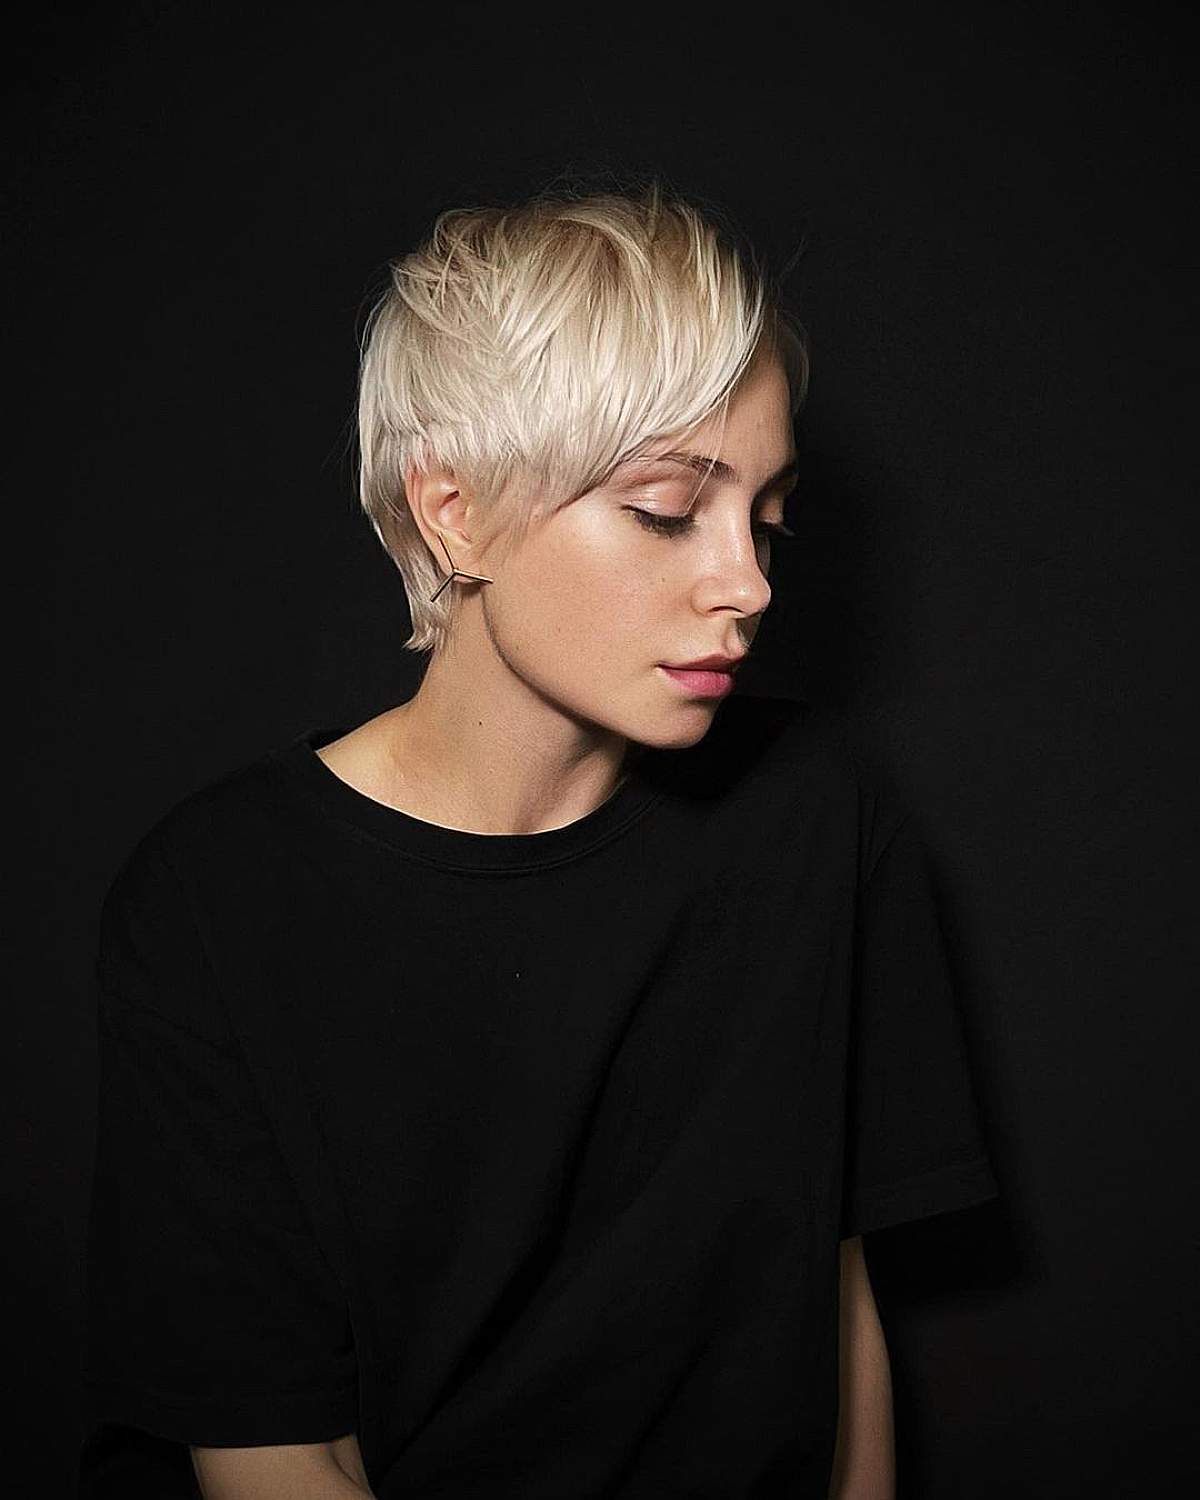 43 Eye-Catching Blonde Pixie Cut Ideas to Show Your Stylist